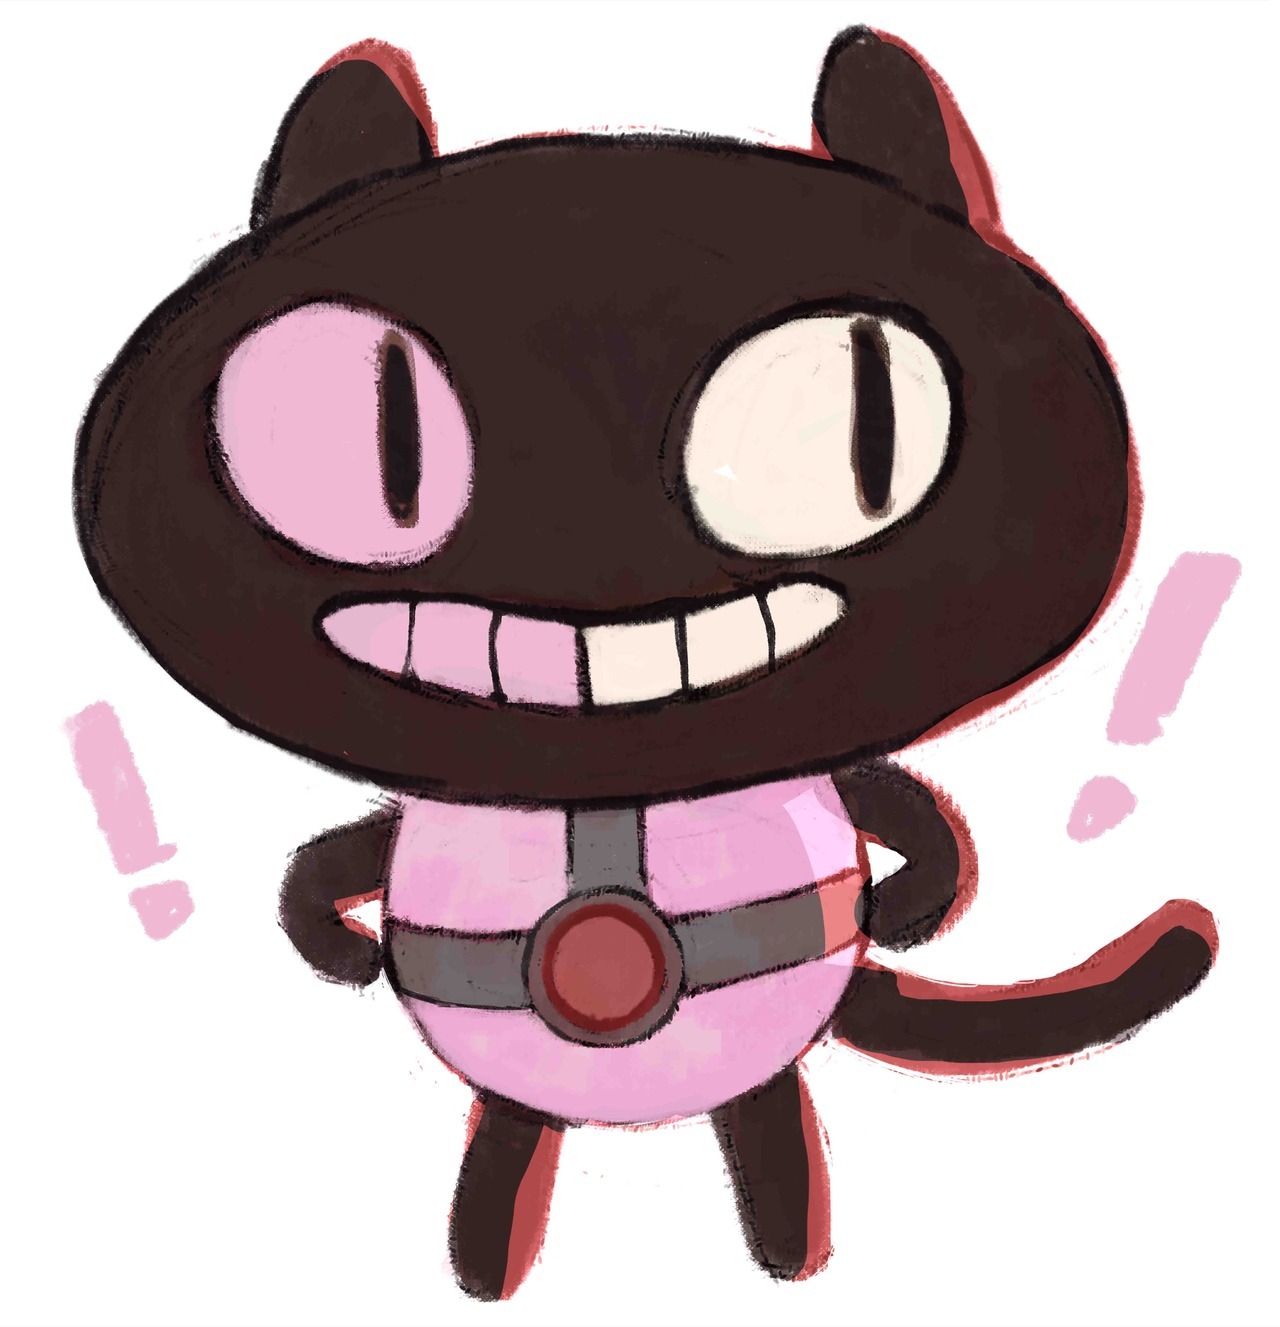 Cookie Cat! He’s a pet for your tummy!